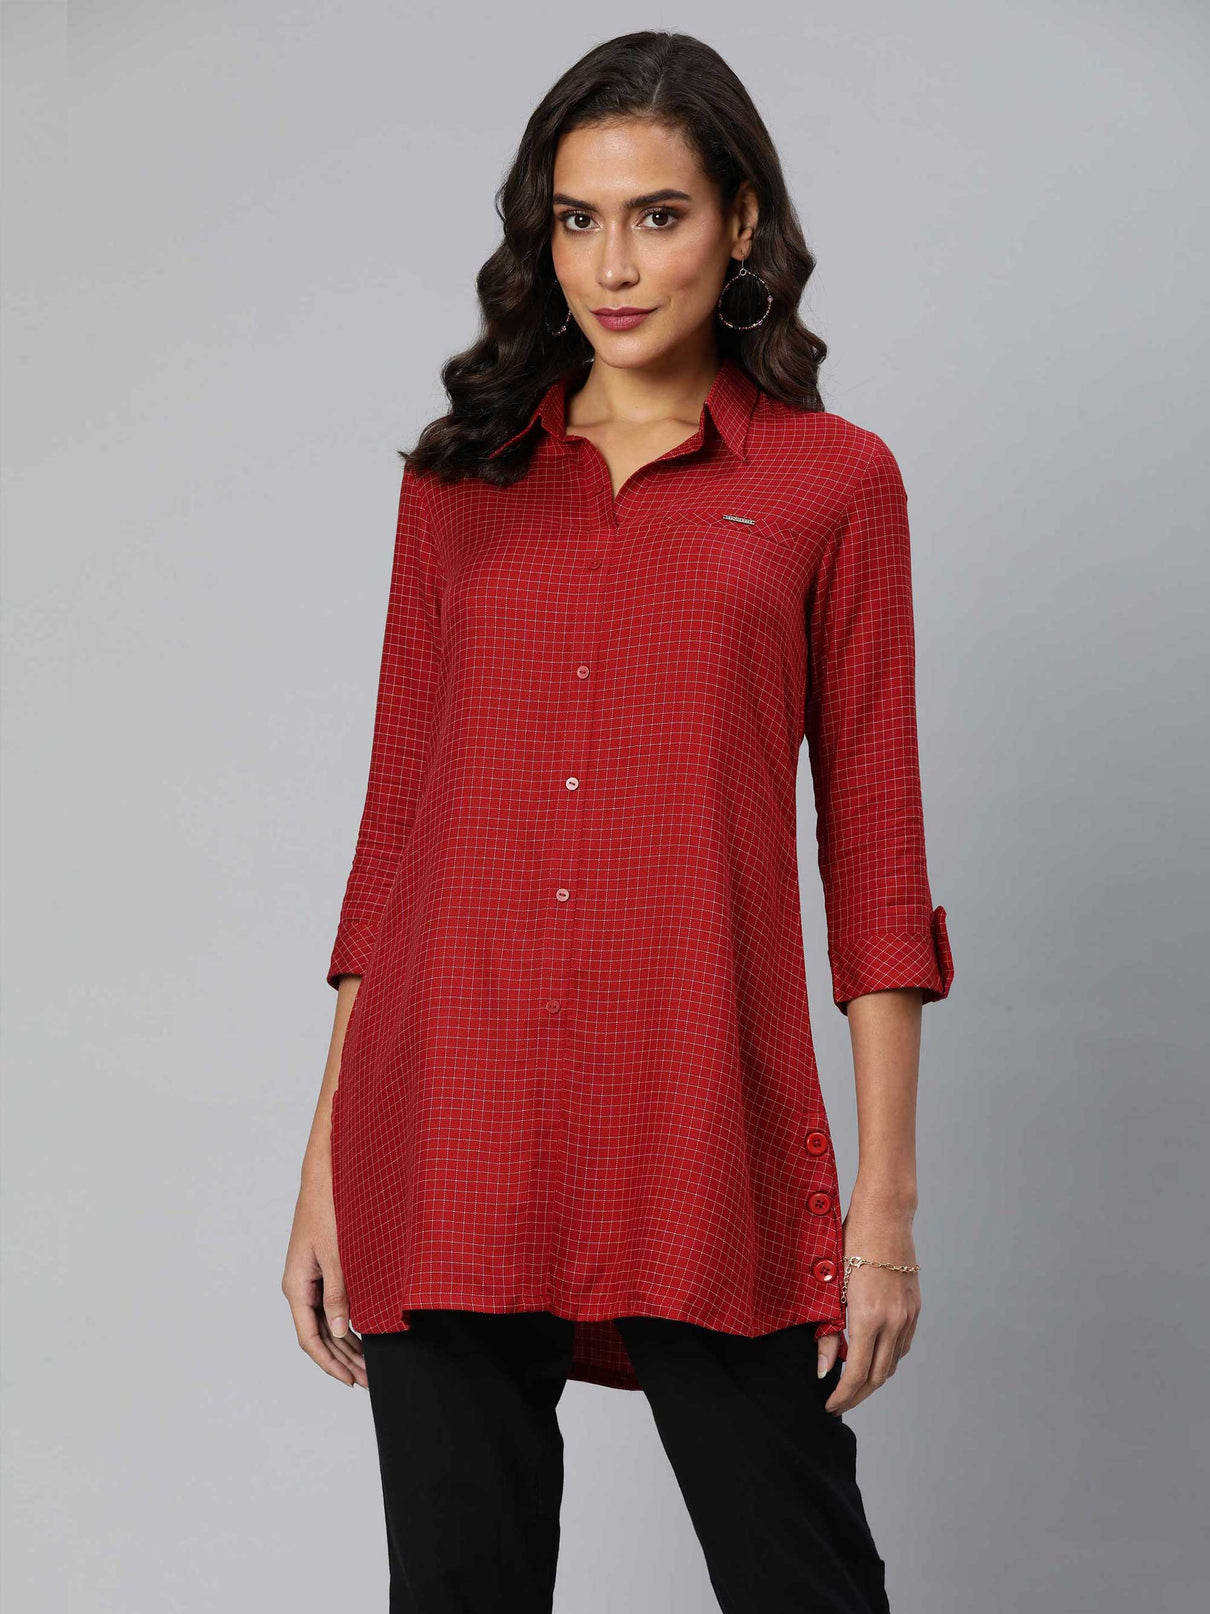 Yarn Dyed Chequered Top - Etiquette Apparel